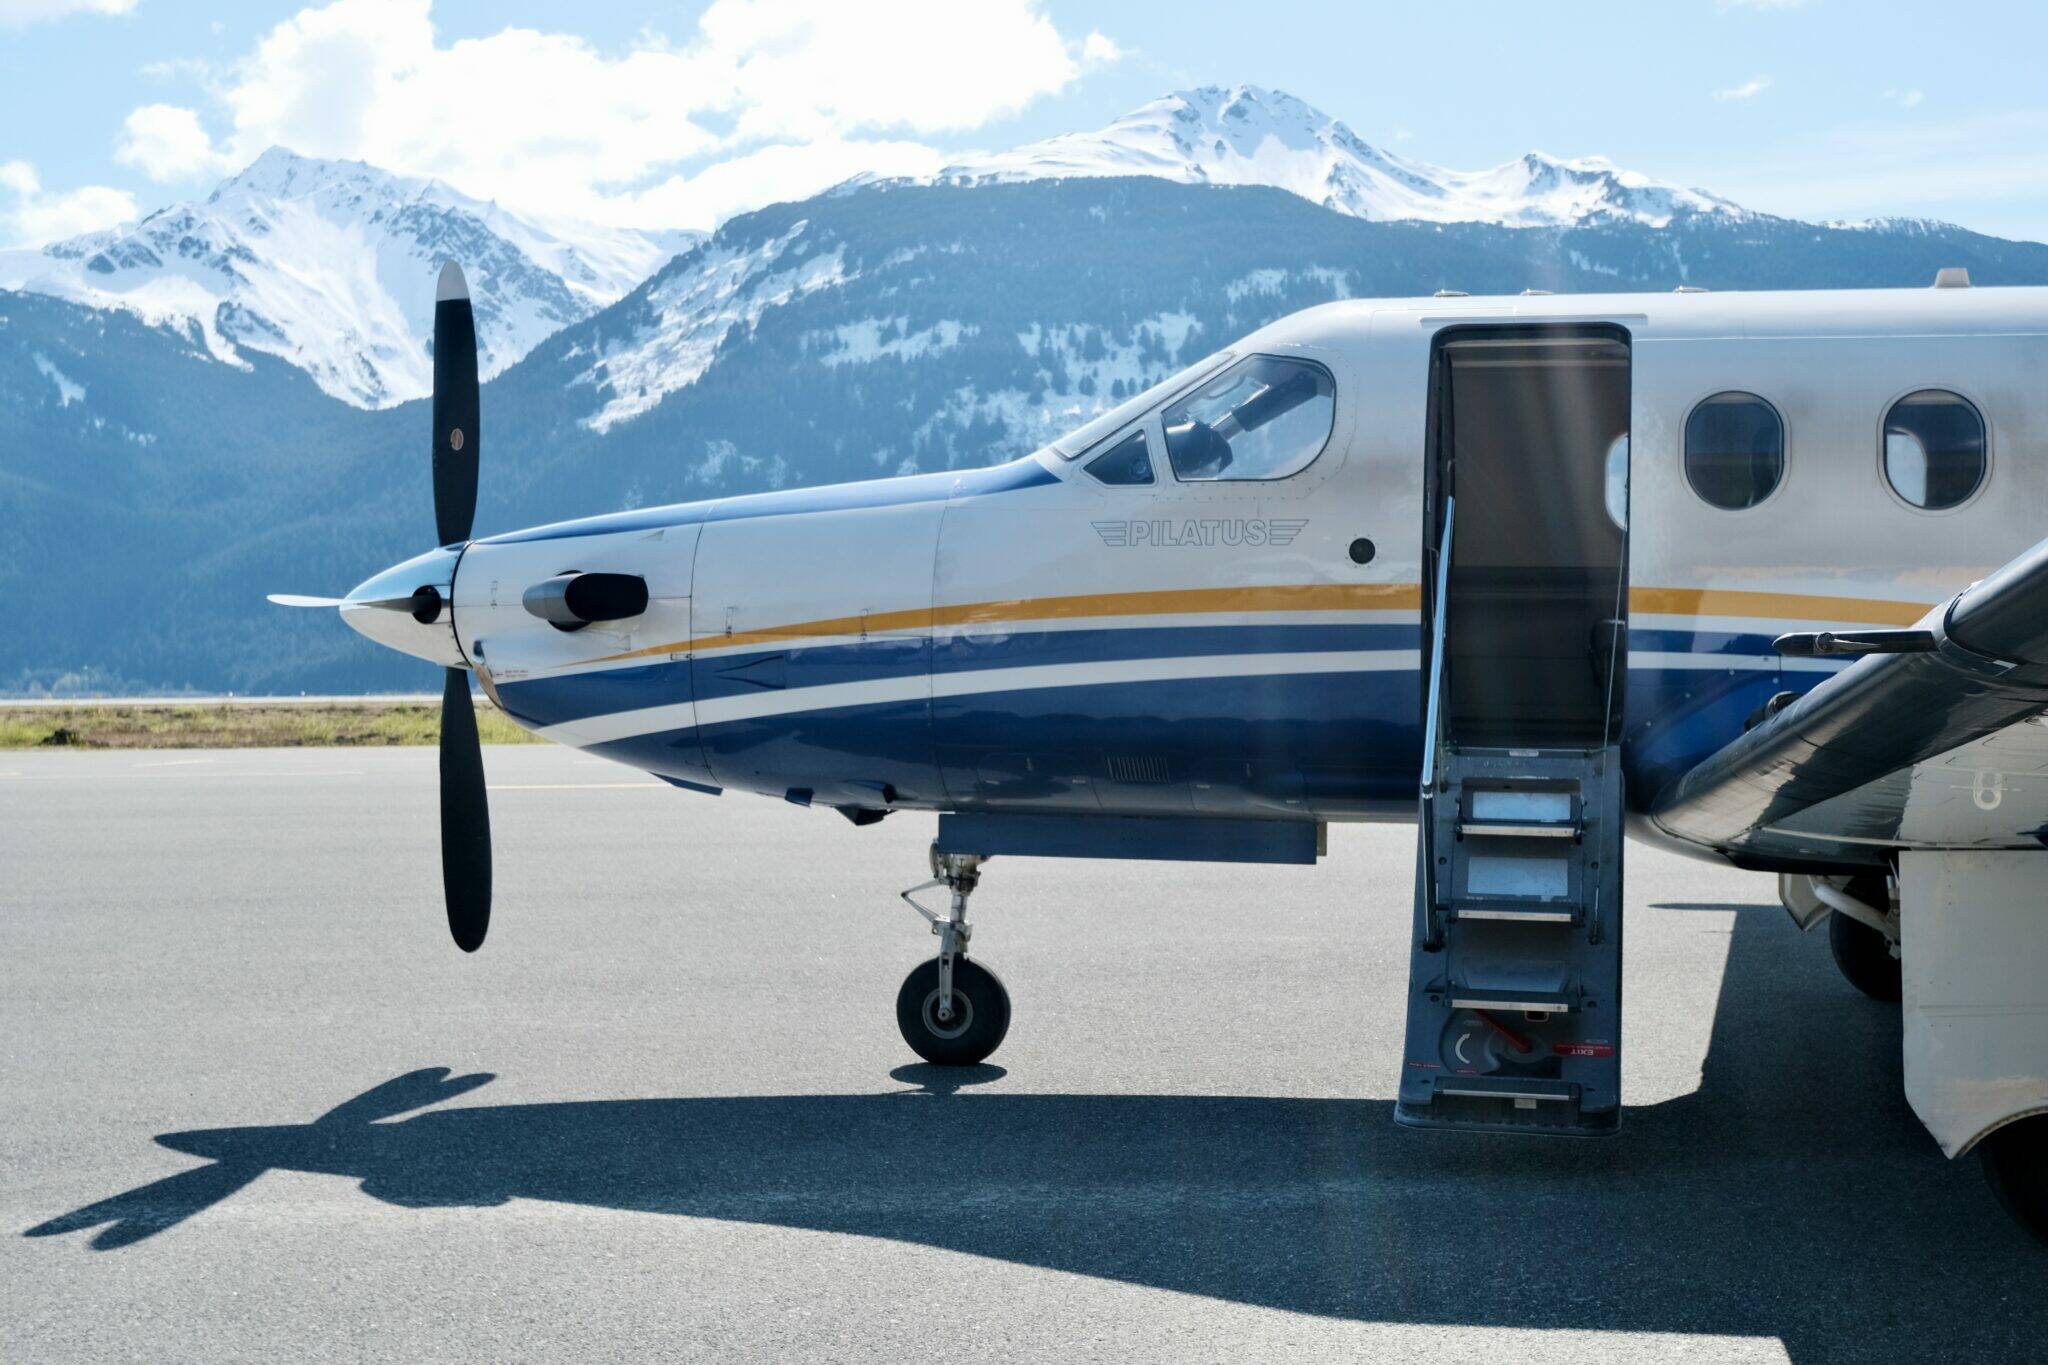 An airplane equipped with instruments to allow for flight in cloudy conditions is ready for passengers at the Haines airport on Thursday. (Claire Stremple/Alaska Beacon)